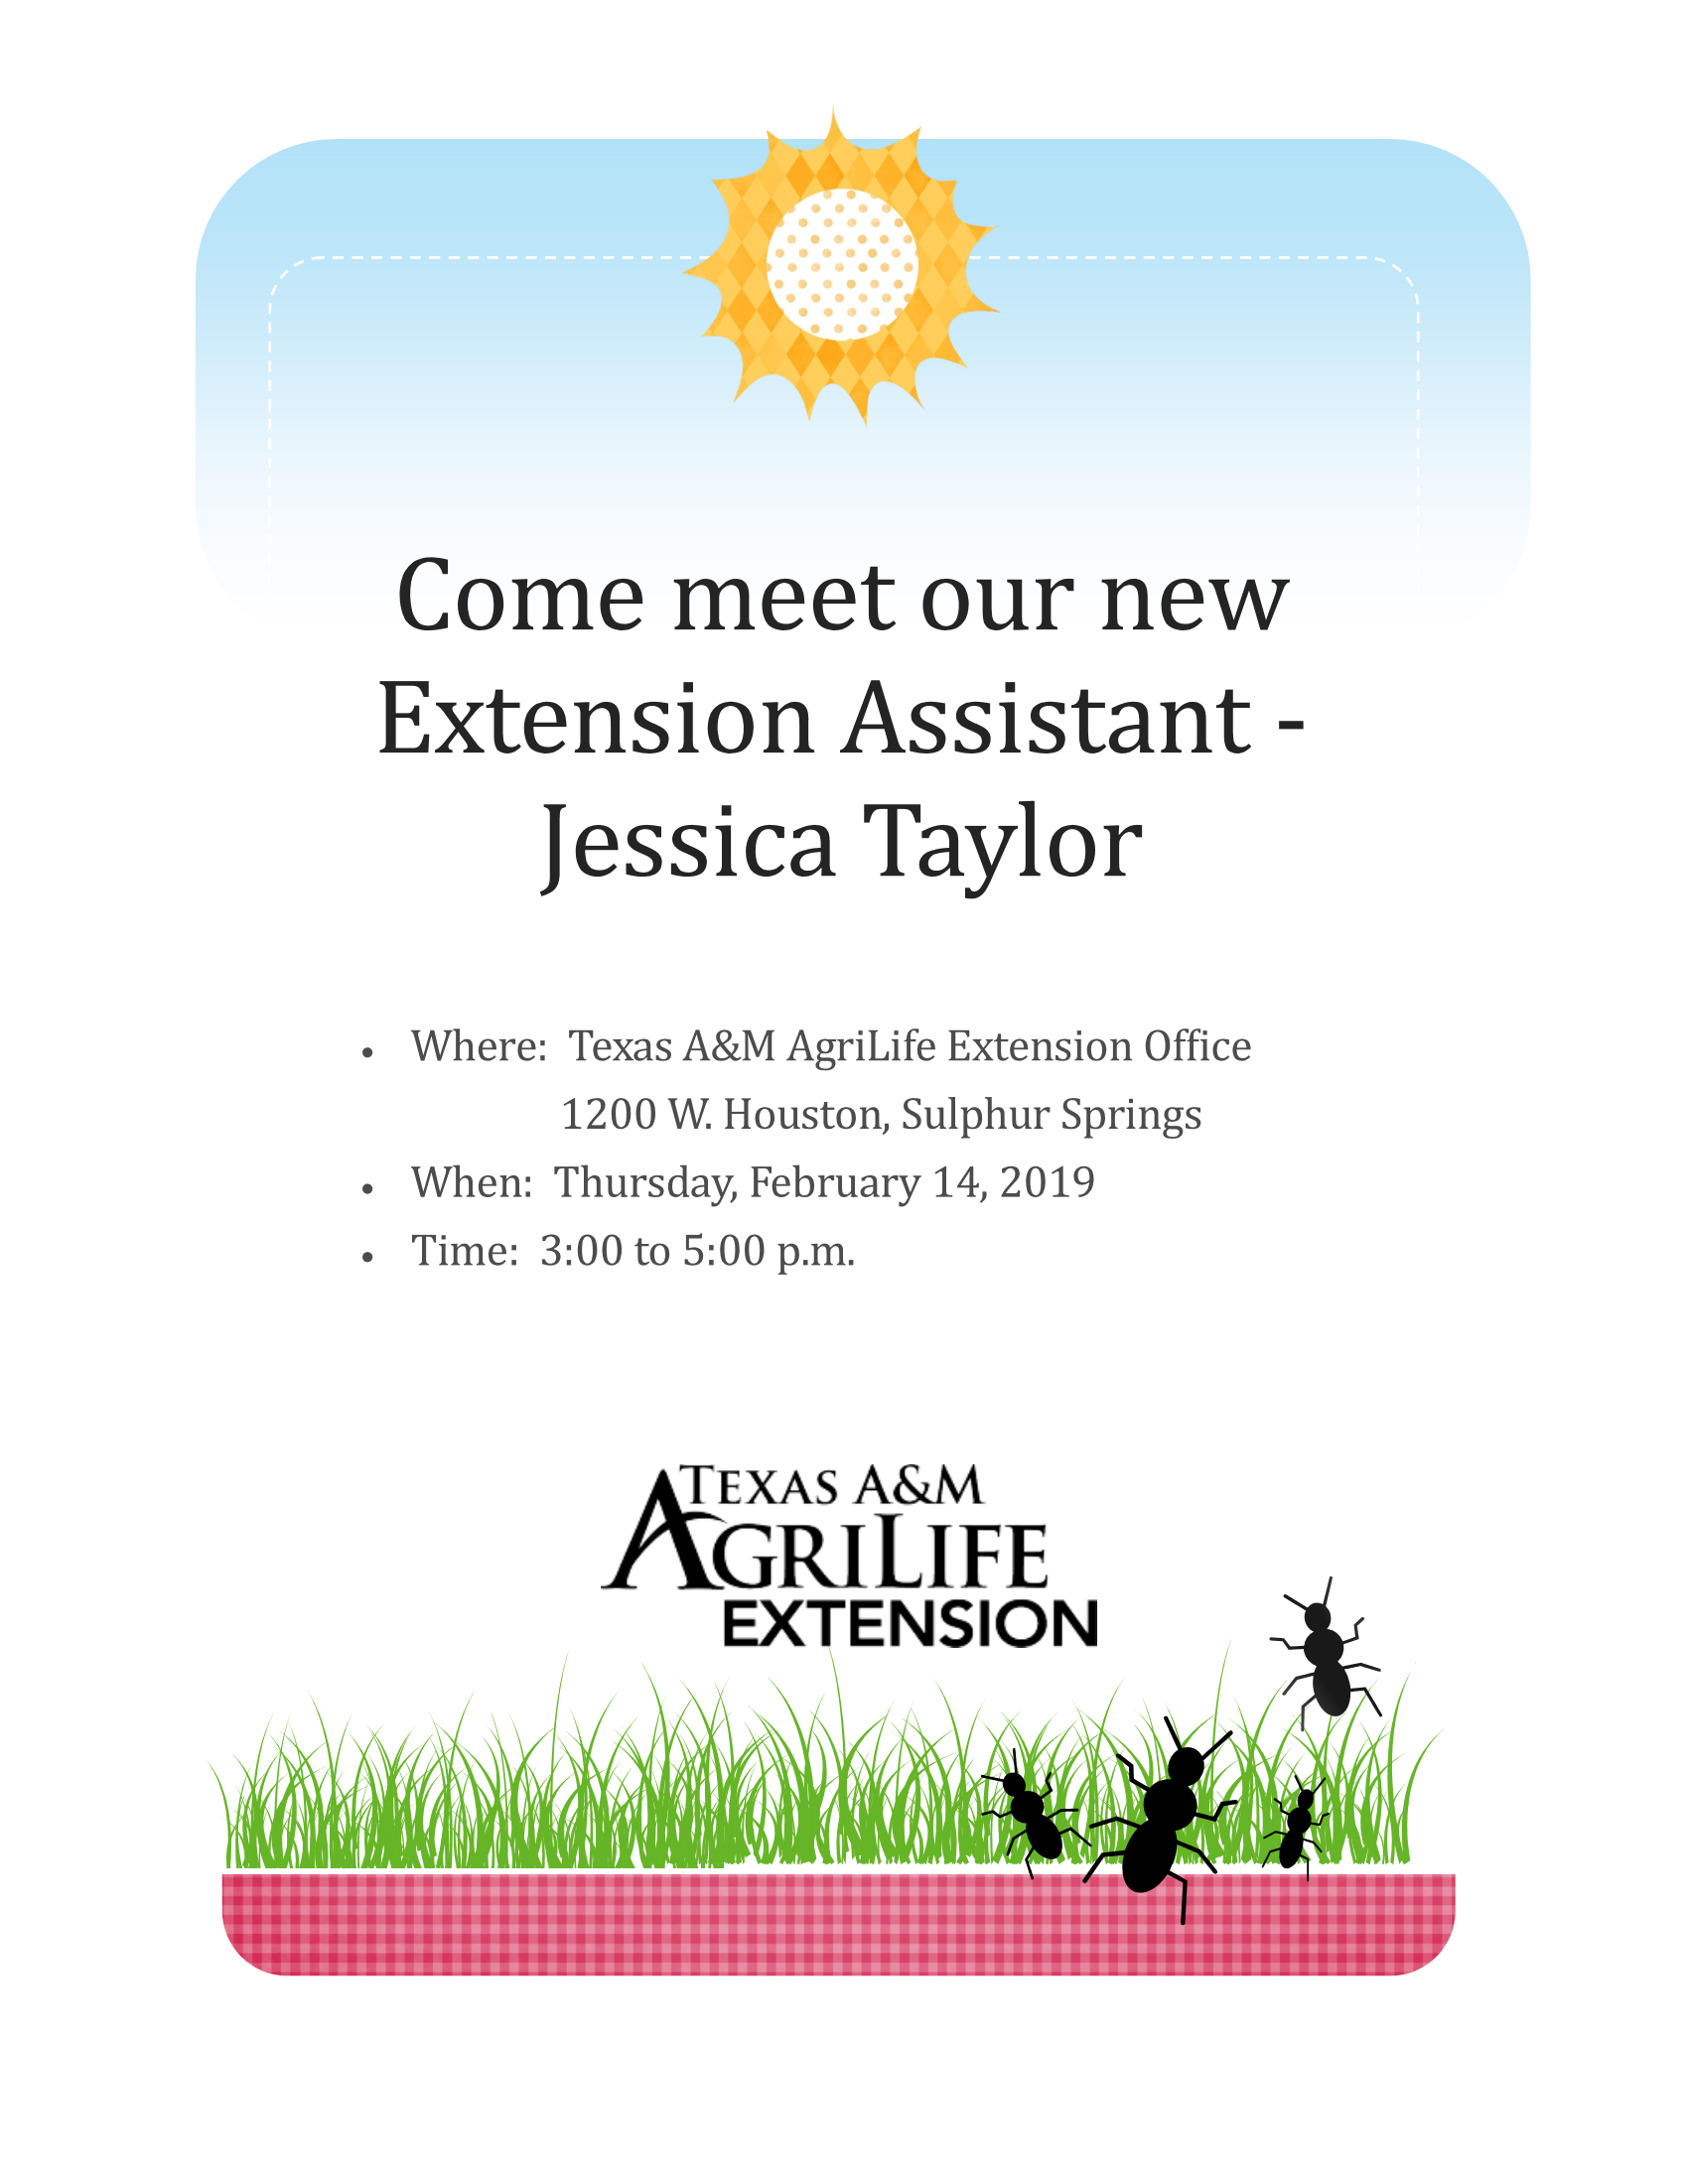 Texas A&M Agri-Life Extension Office Holding Meet and Greet for New Extension Agent Jessica Taylor on Next Thursday